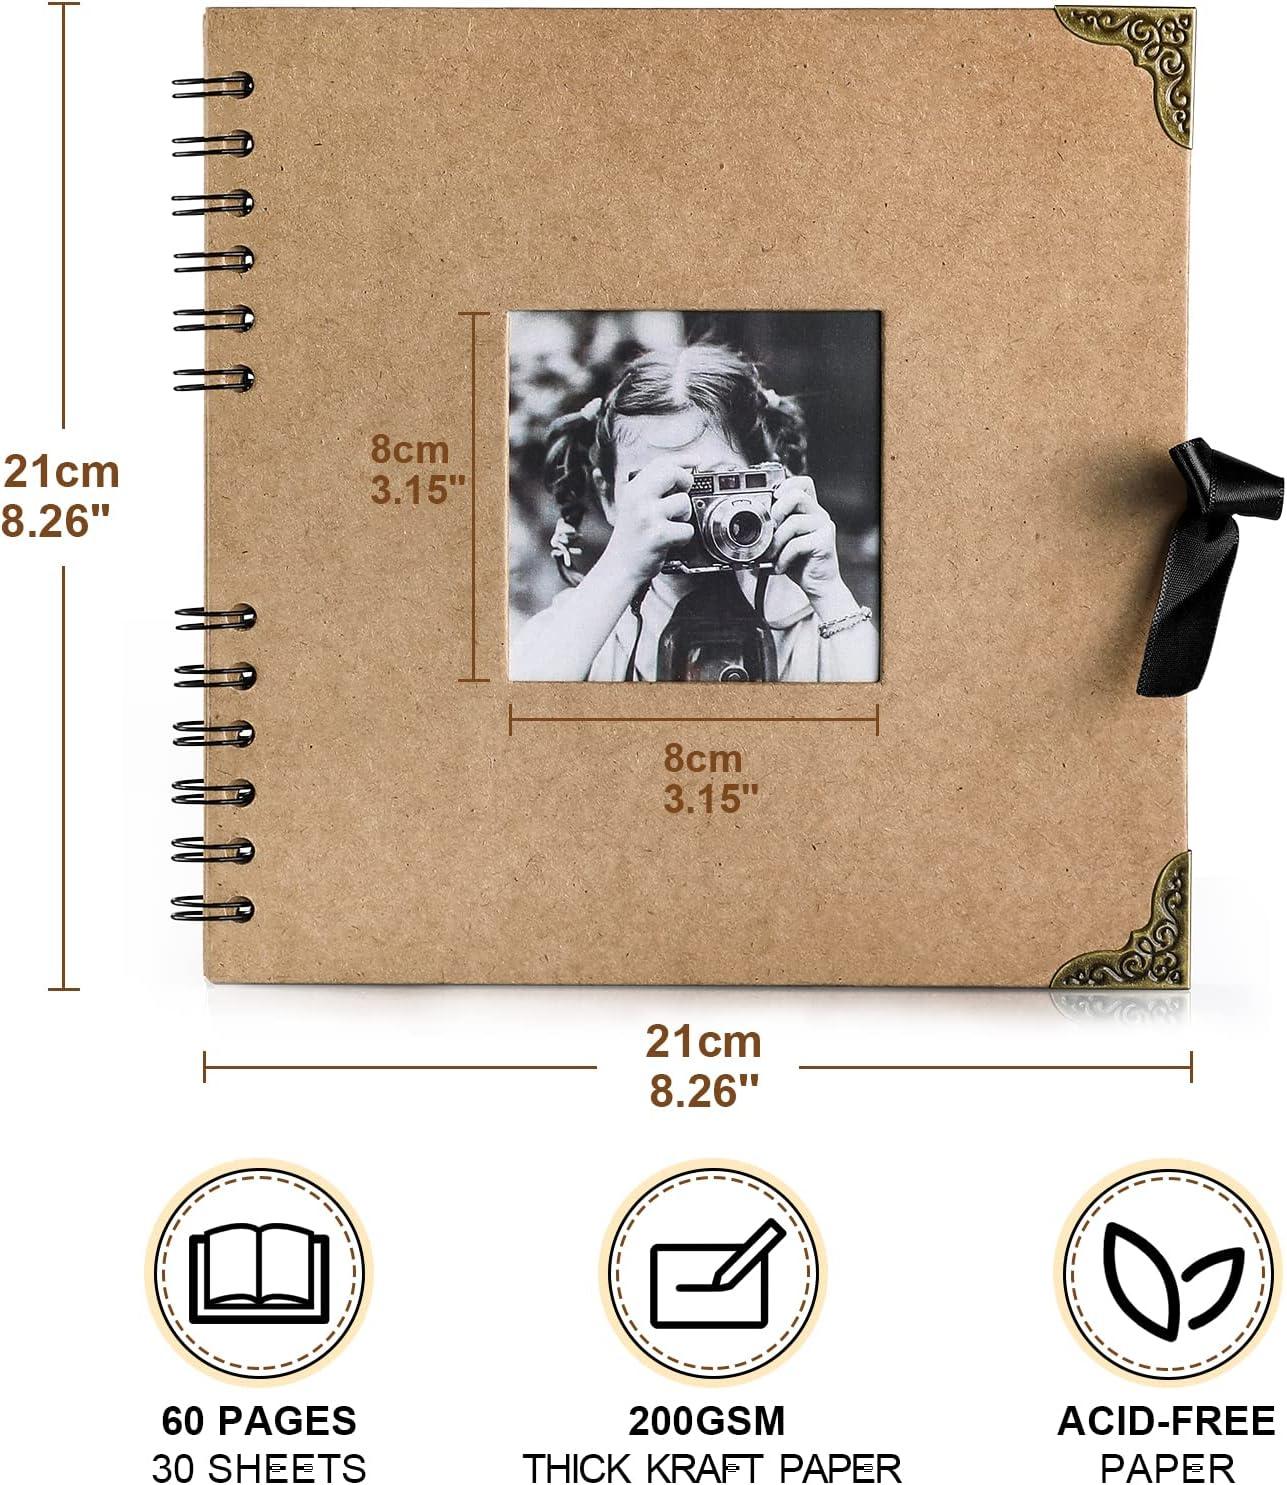  Bstorify Scrapbook Album 60 Pages (8 x 8 Inch) Brown Thick  200gsm Kraft Paper, Photo Album Scrapbook, Memory Book - Ideal for Your Scrapbooking  Albums Art & Craft Projects : Arts, Crafts & Sewing